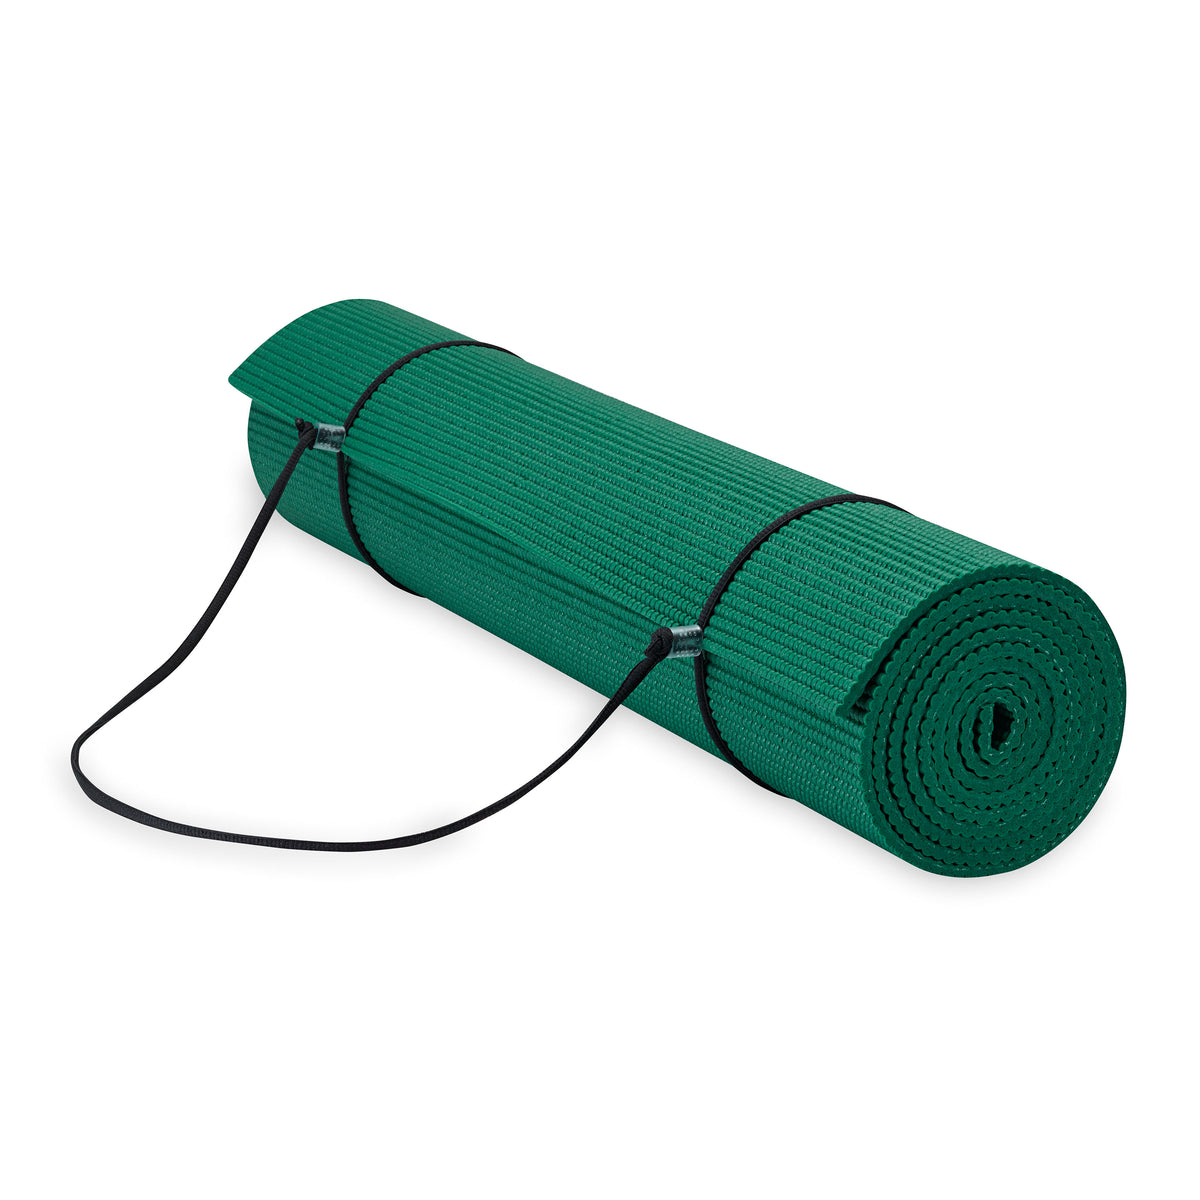 Gaiam Essentials Yoga Mat Green rolled up with sling